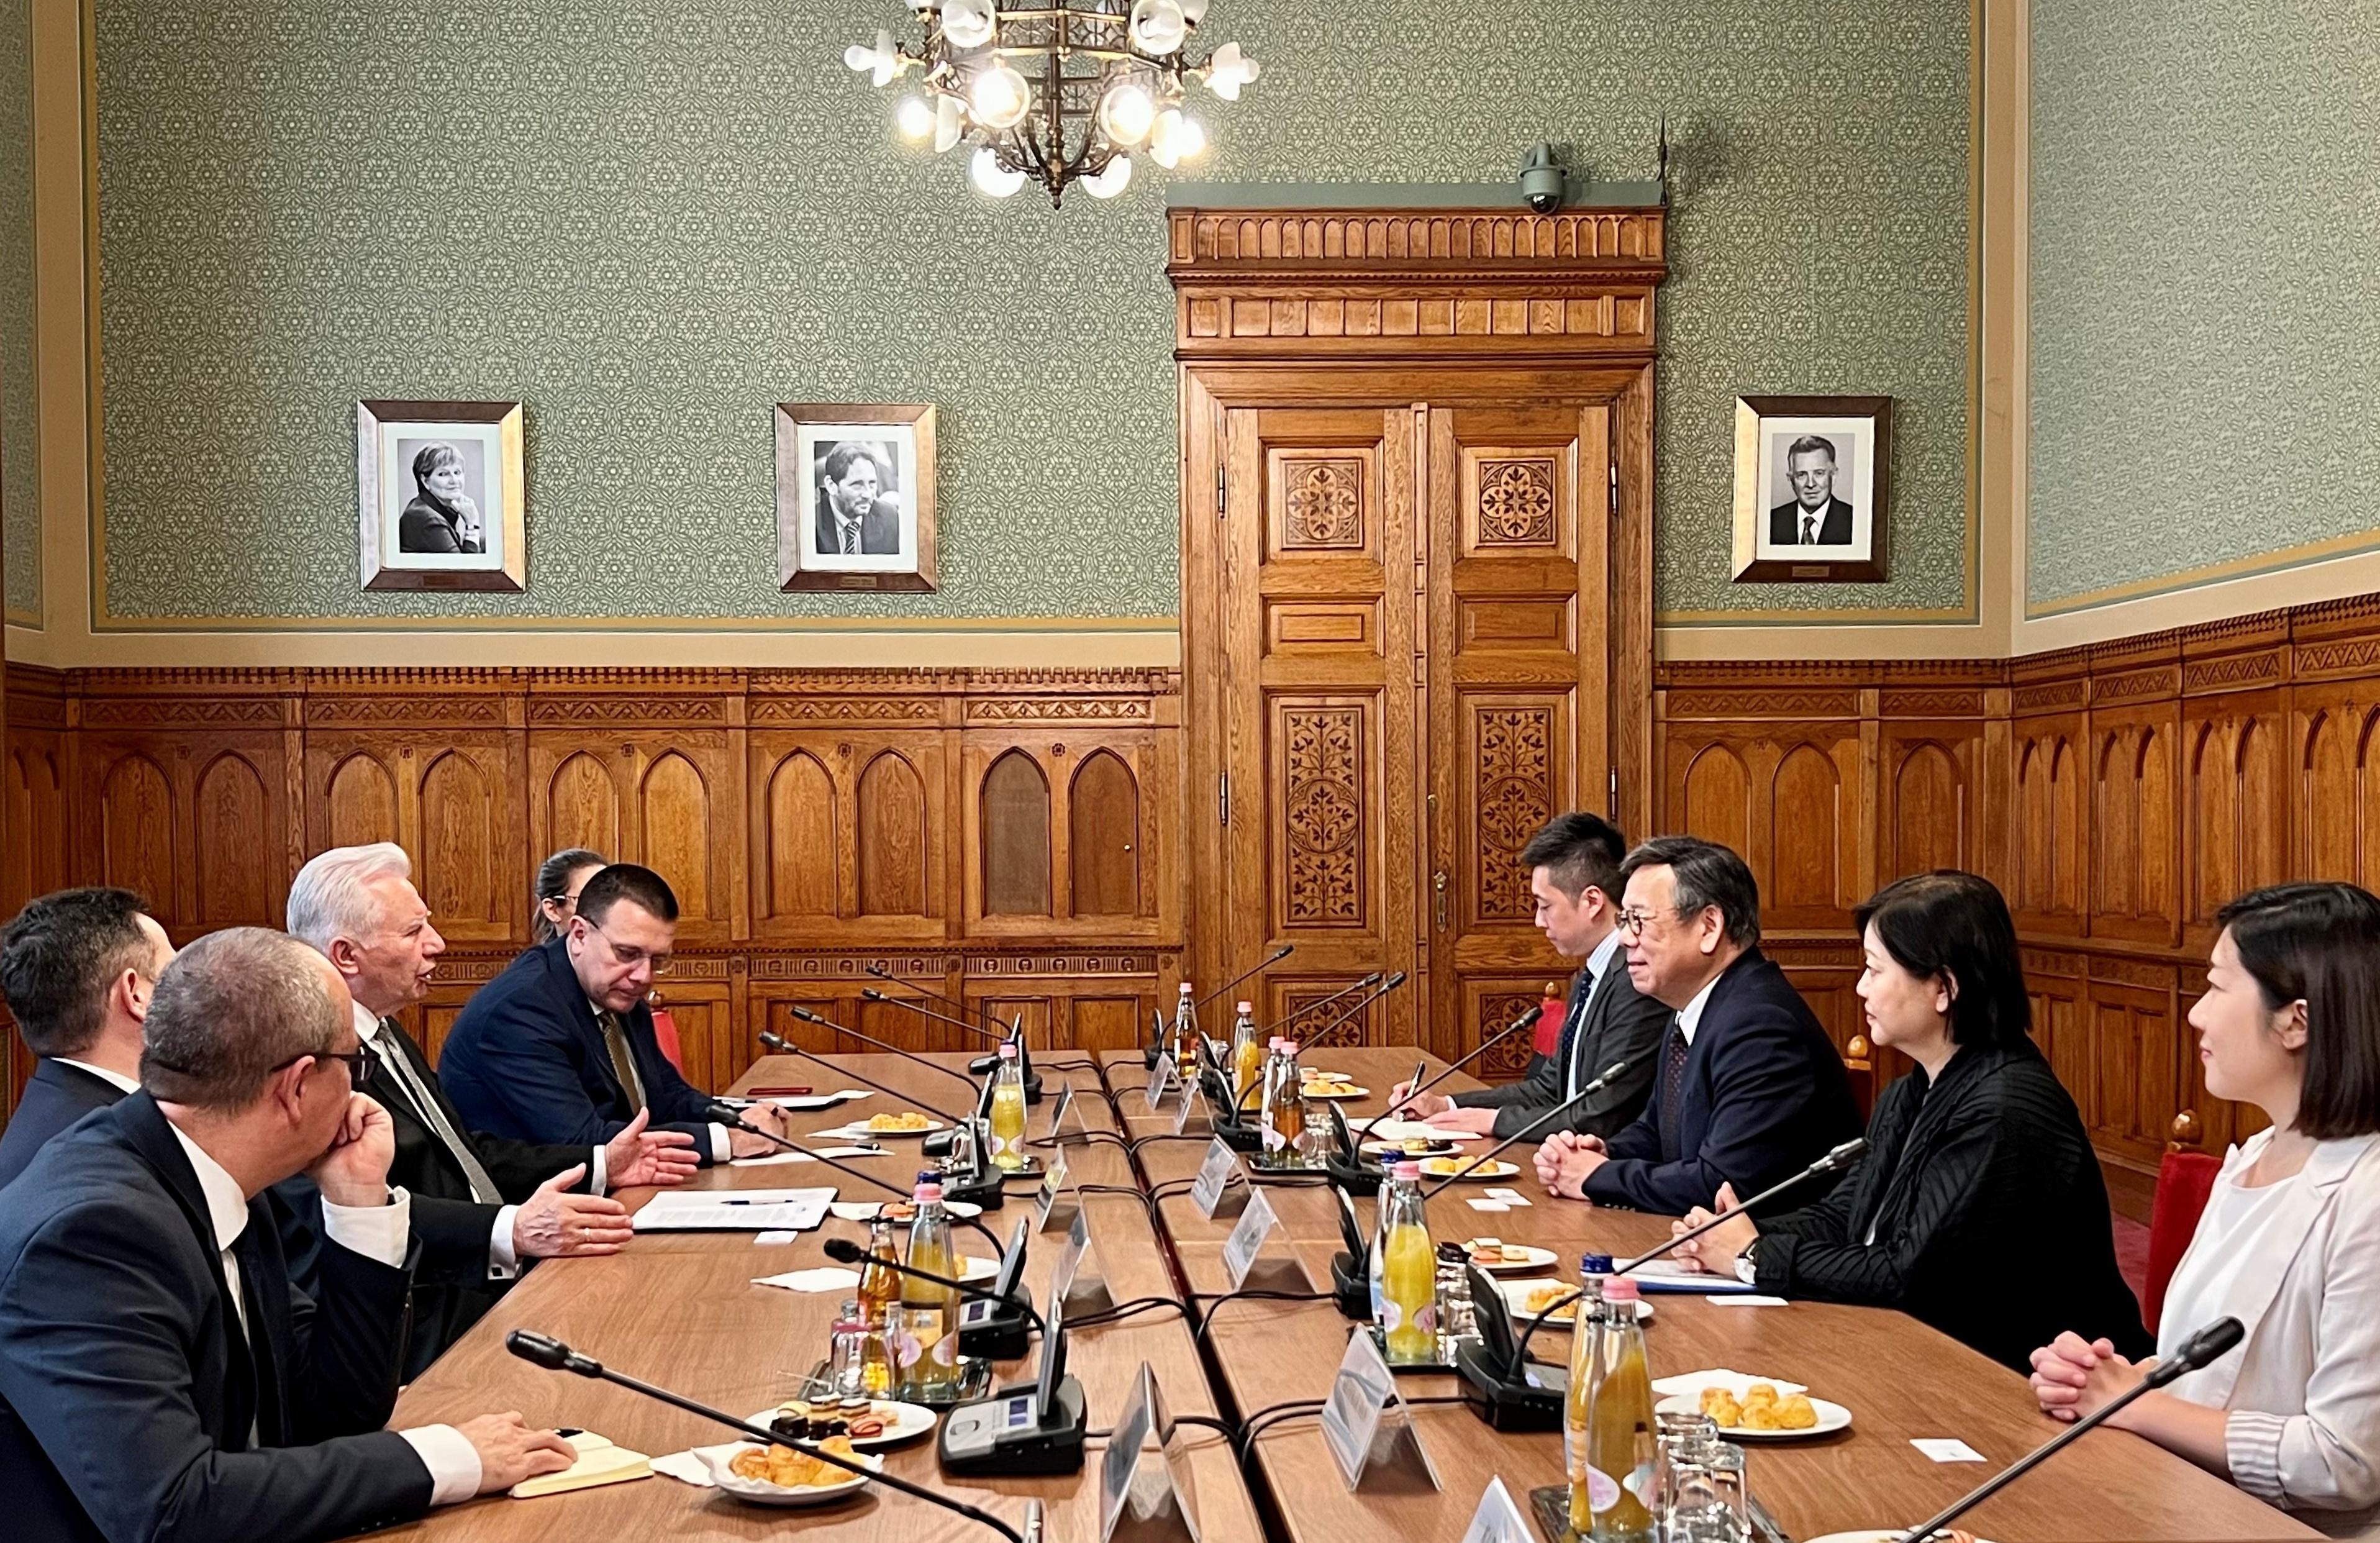 The Secretary for Commerce and Economic Development, Mr Algernon Yau (third right), meets with the Deputy Speaker of the National Assembly of Hungary, Mr István Jakab (third left), in Budapest, Hungary, on June 8 (Budapest time) to exchange views on issues of mutual concern.